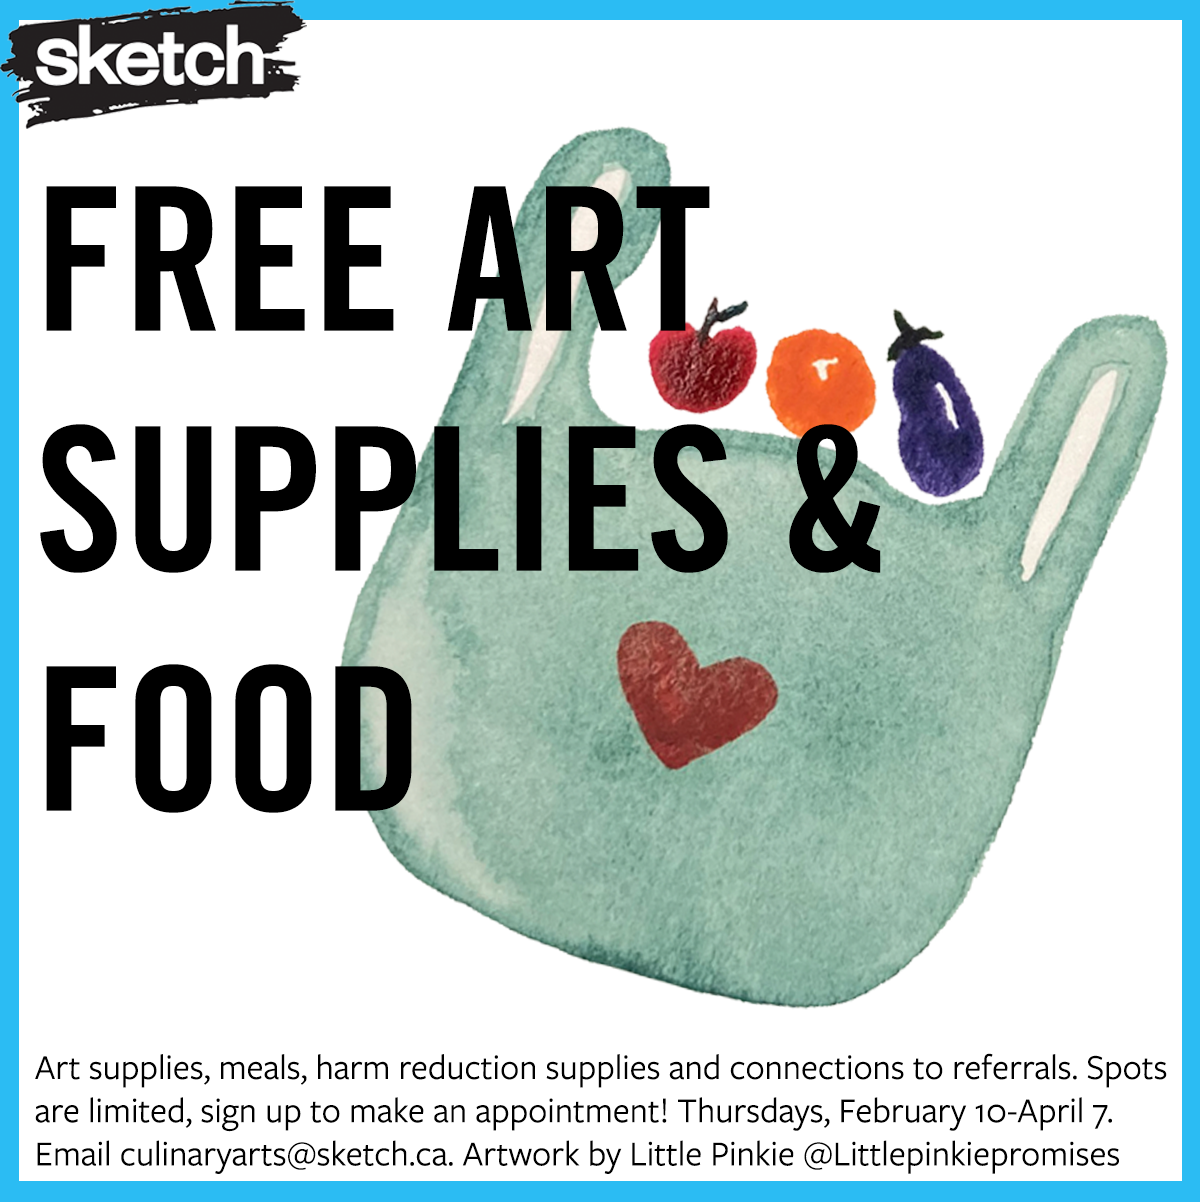 A watercolour painting of a teal bag with a heart on it, with an apple, an orange and an eggplant going into the bag. A blue border and the SKETCH logo, along with the text “Art supplies, meals, harm reduction supplies and connections to referrals. Spots are limited, sign up to make an appointment! Thursdays, February 10-April 7. Email culinaryarts@sketch.ca. Artwork by Little Pinkie @Littlepinkiepromises”